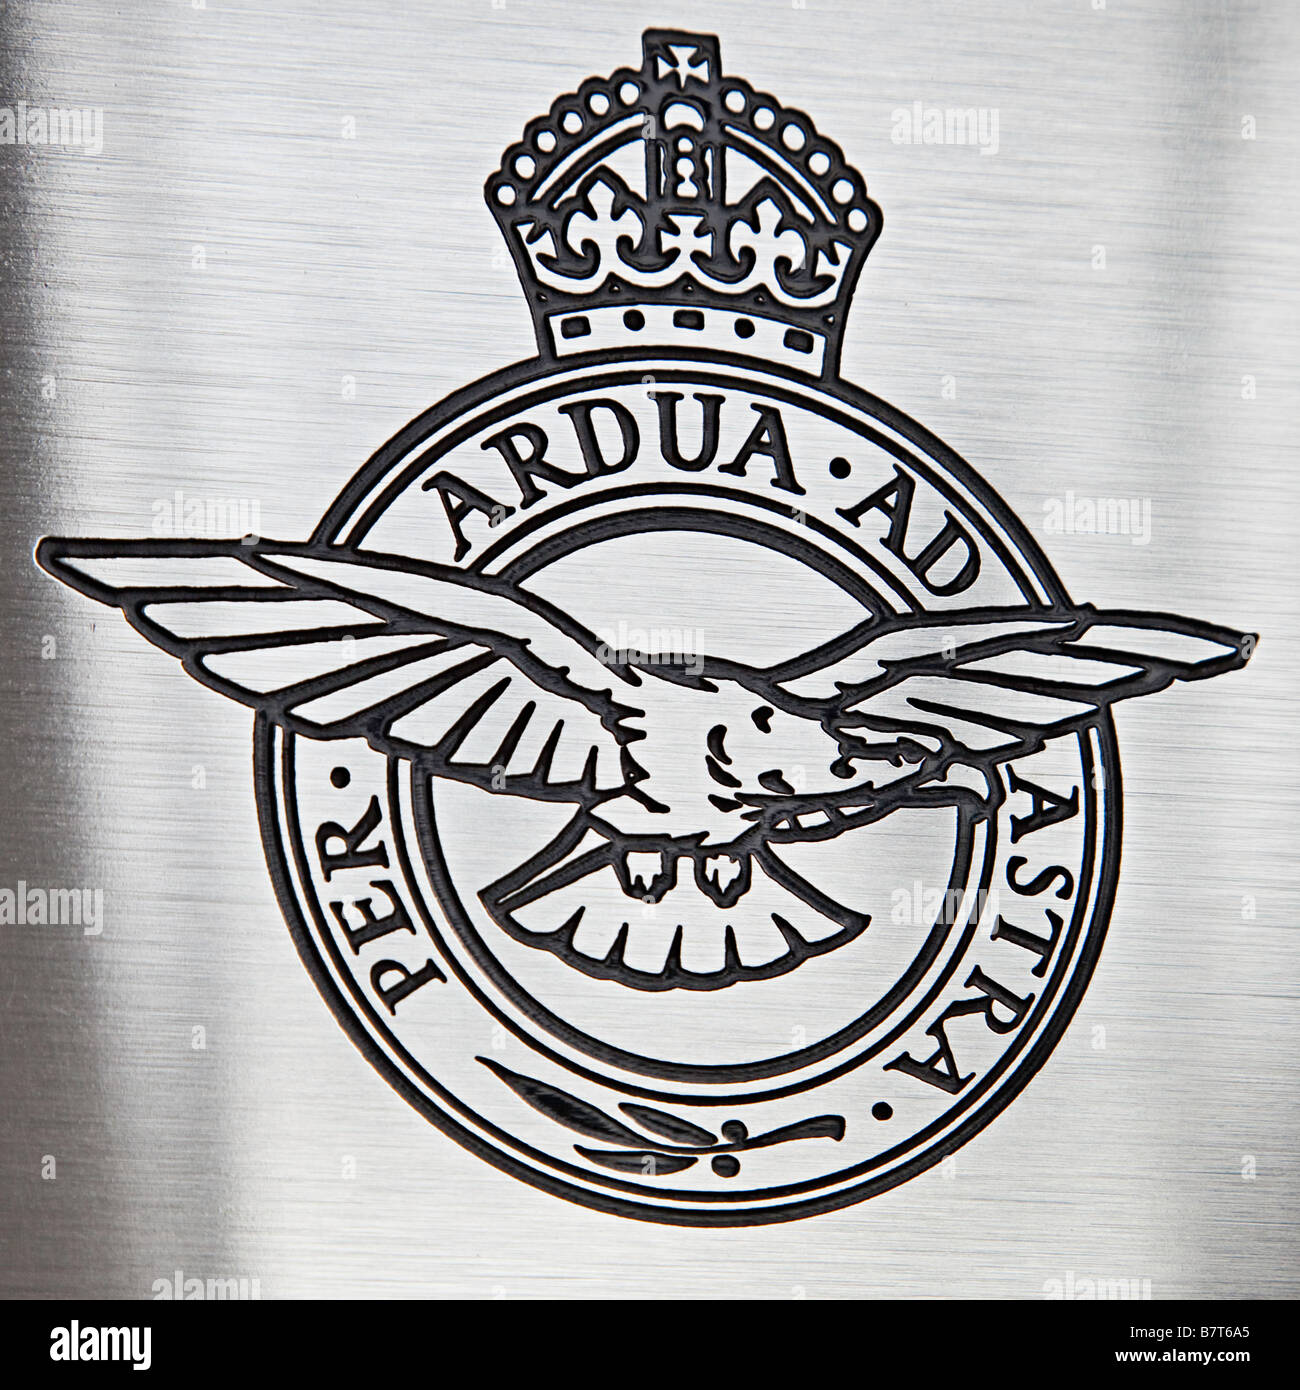 Royal Air Force Badge - Motto Through Struggle To The Stars - Eagle Volant  & Affronty Head Sinister & Imperial Crown - Runnymede Stock Photo - Alamy